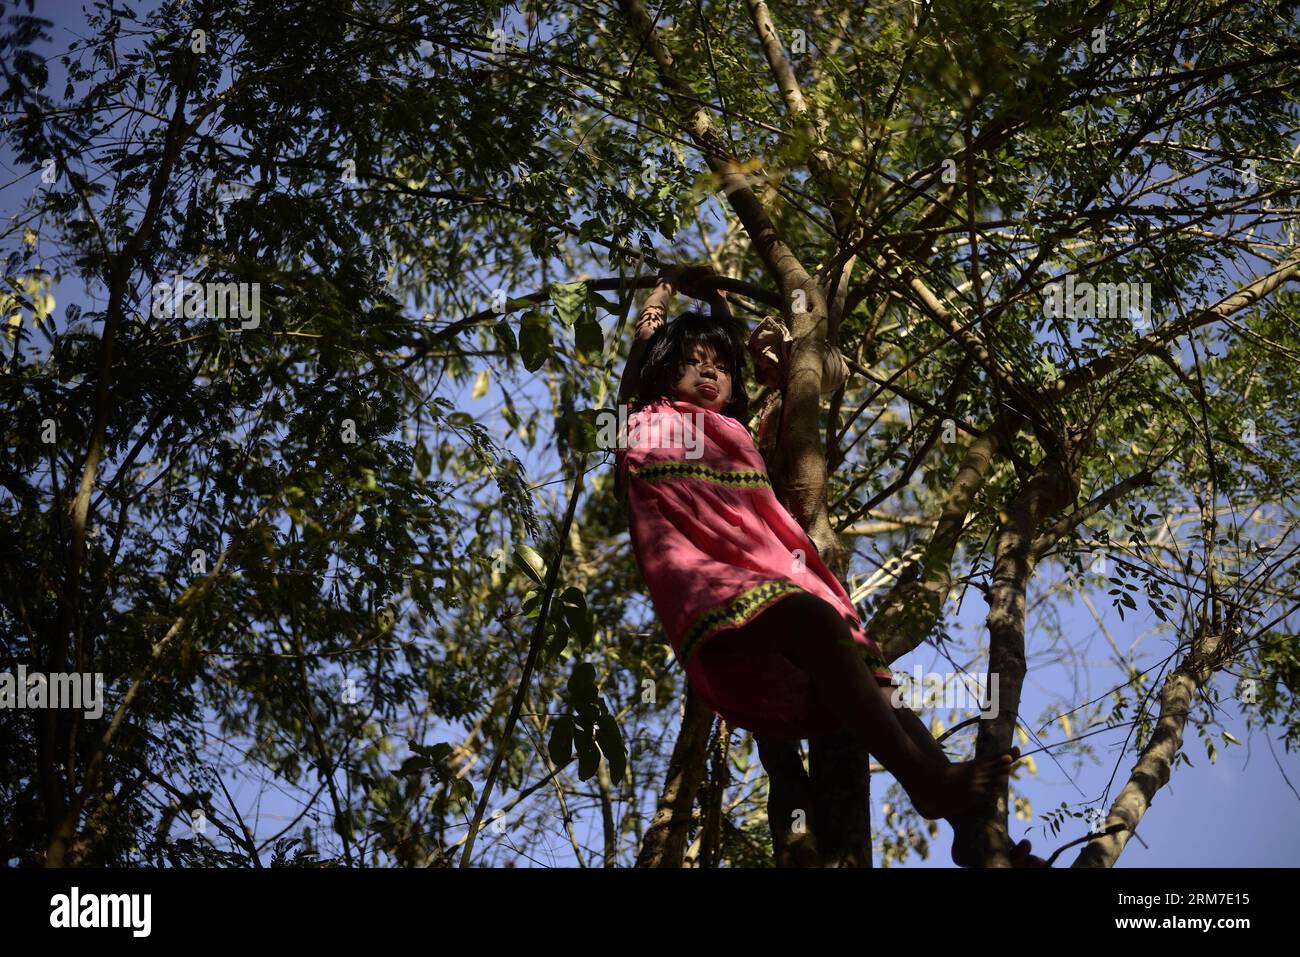 A girl of the Ngabe Bugle ethnic group plays on a tree in Kiad community in the Ngabe Bugle indigenous region, 450 km west of Panama City, capital of Panama, on Feb. 24, 2014. The Ngabe Bugle indigenous region is located in the western region of Panama, and covers an area of 6,968 square km, with 91 per cent of its population living in extreme poverty. Native leaders of the Ngabe Bugle region declared a national alert , because of the eviction notice issued by a company which is developing the hydro-electric project Barro Blanco . The project will use the water from Tabasara river in Chiriqui Stock Photo